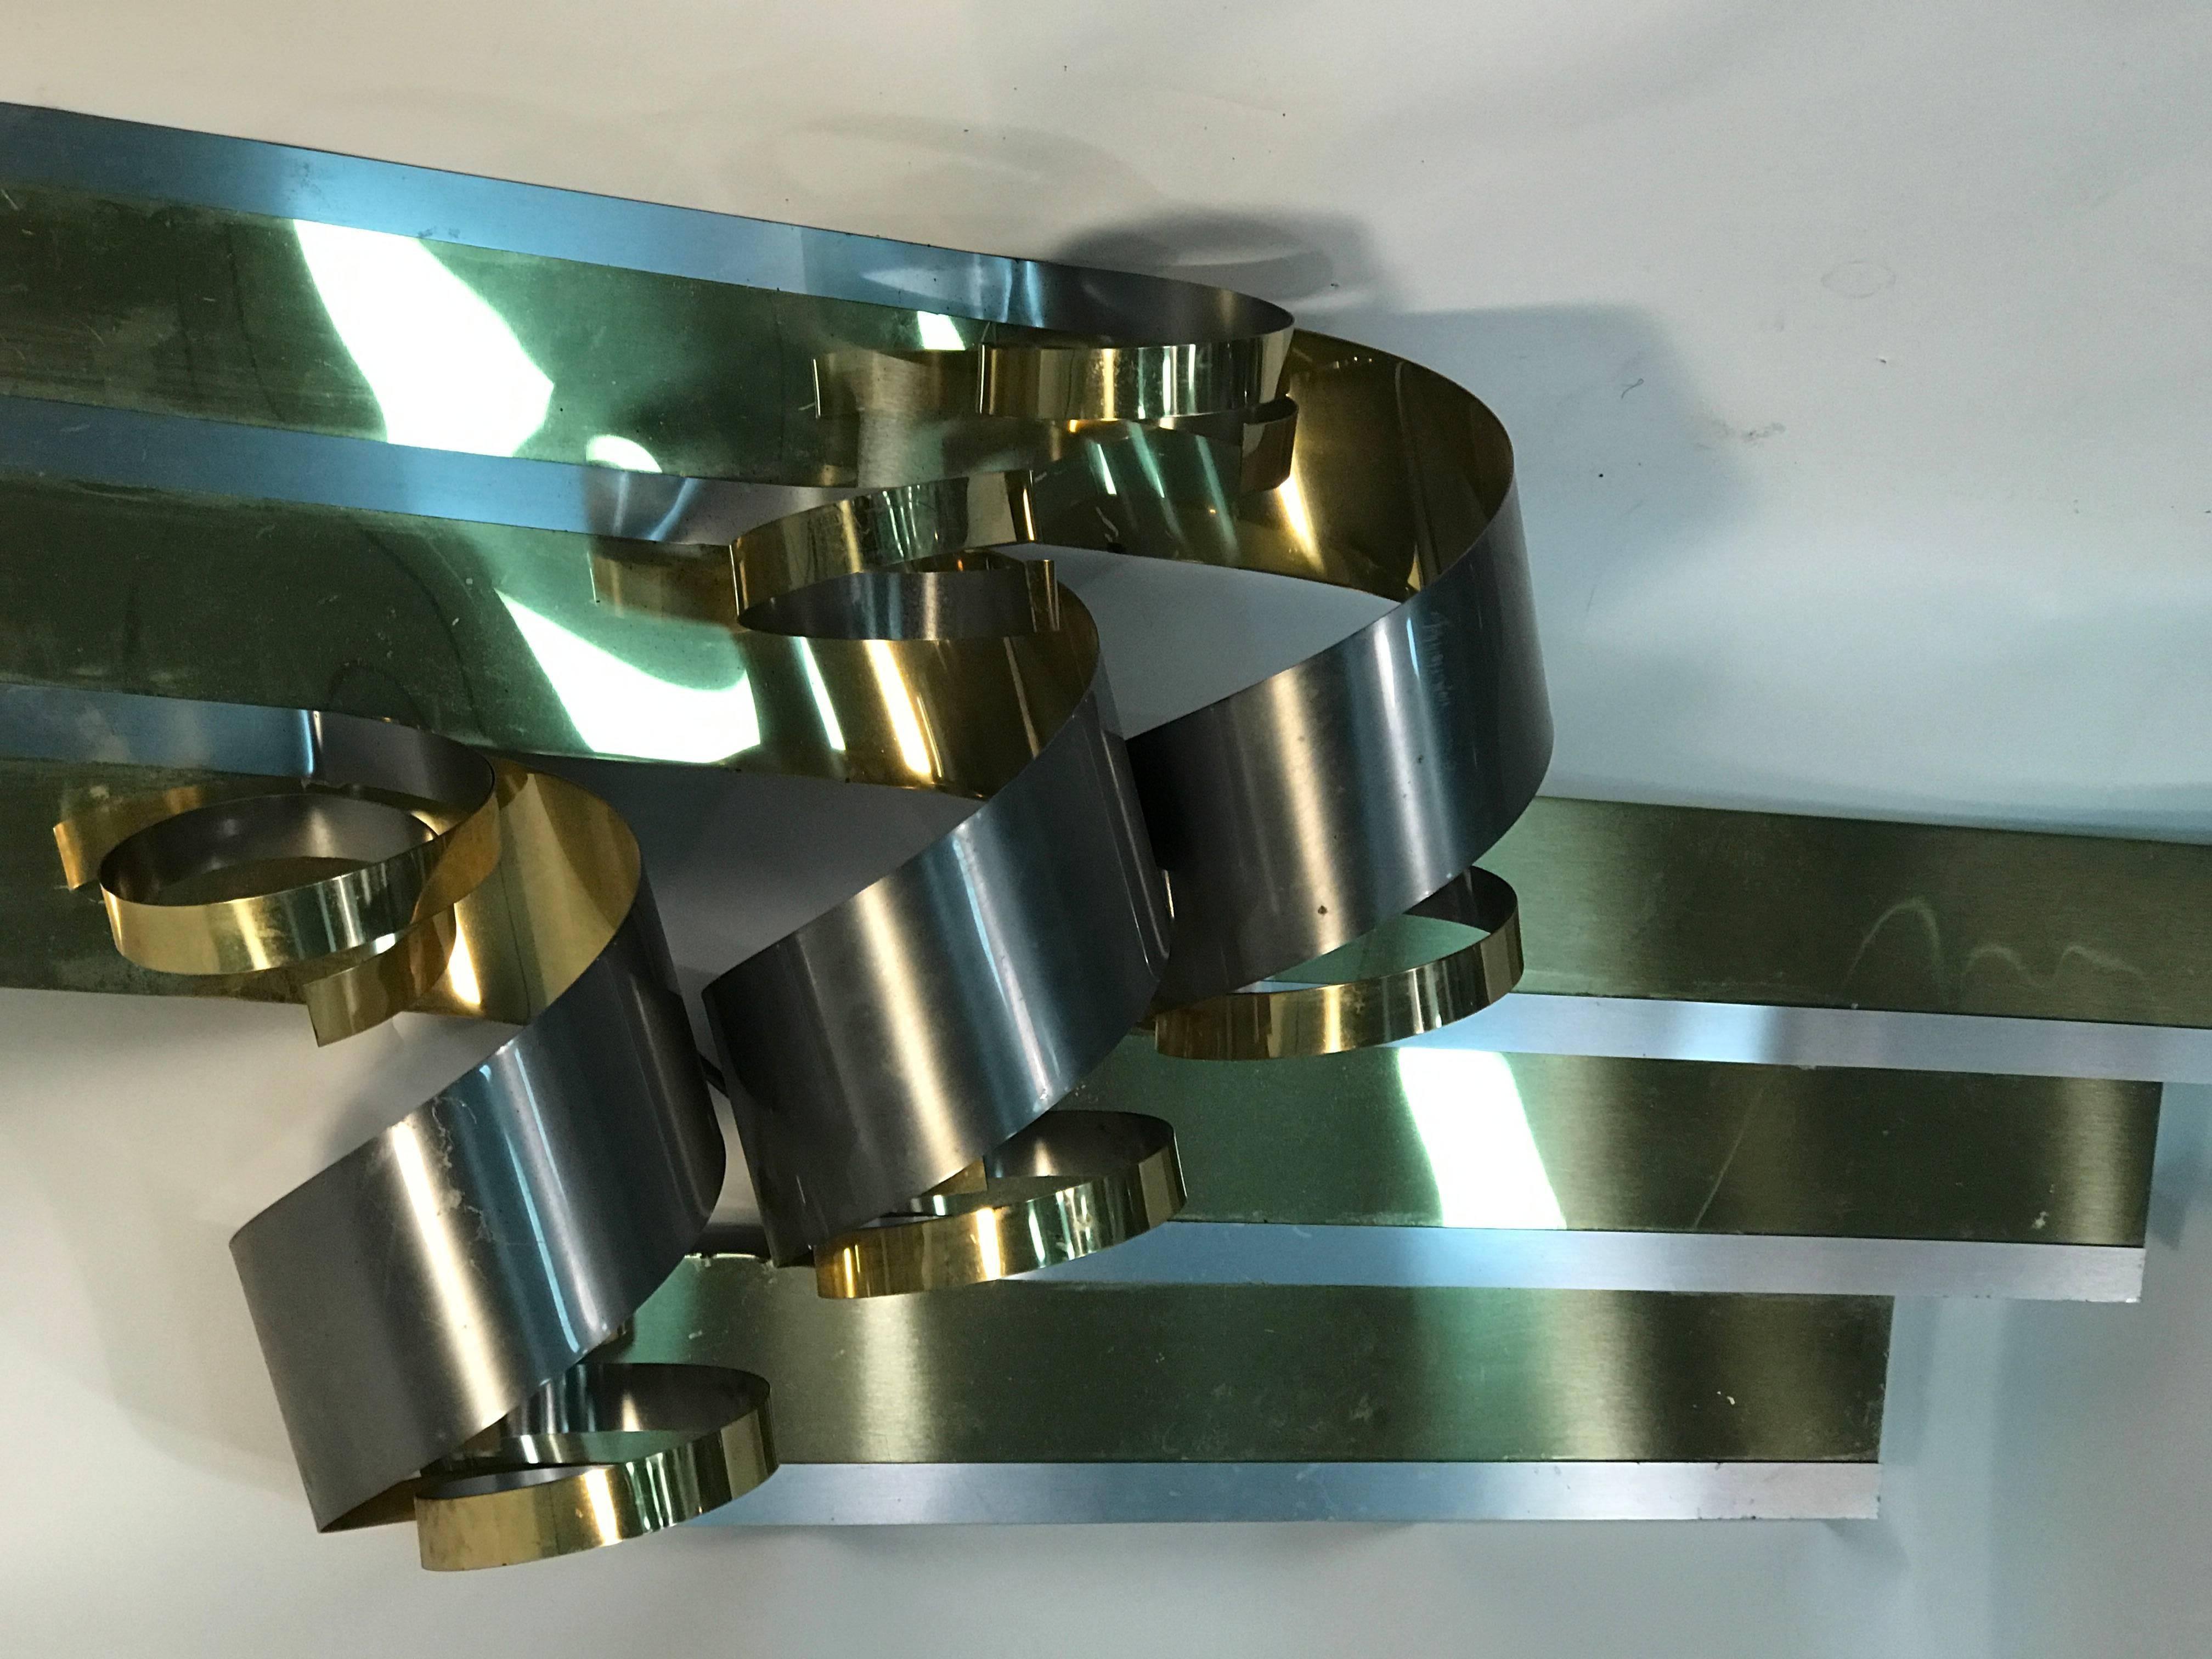 Magnificent Modernist Curtis Jere Ribbon Motif Wall Sculpture in Chrome & Brass In Good Condition For Sale In Mount Penn, PA